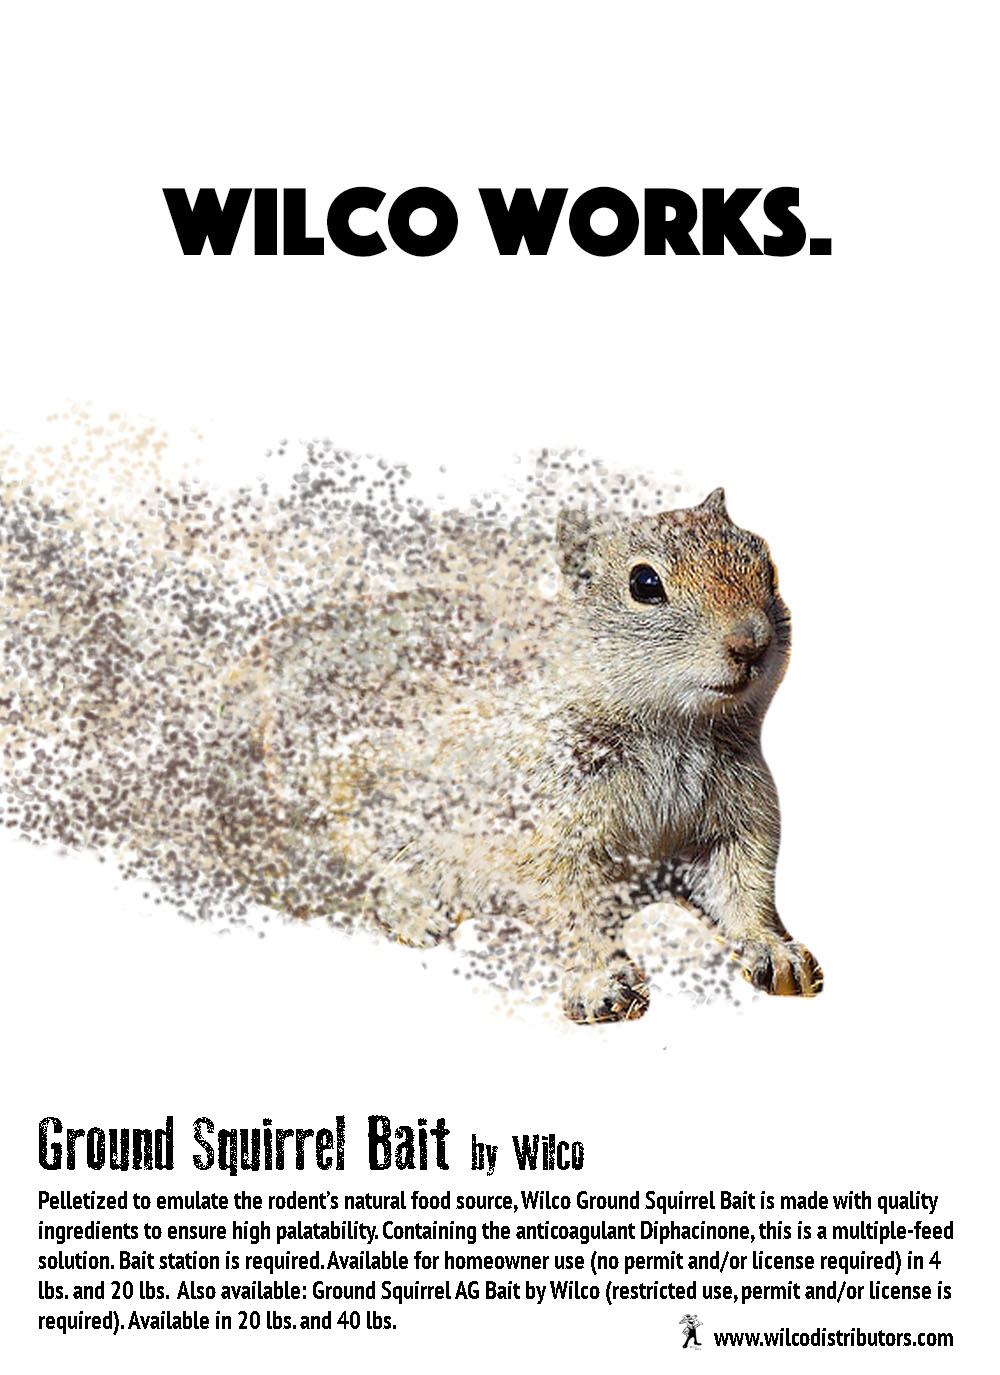 Wilco-Works-GS-BAIT-disolving